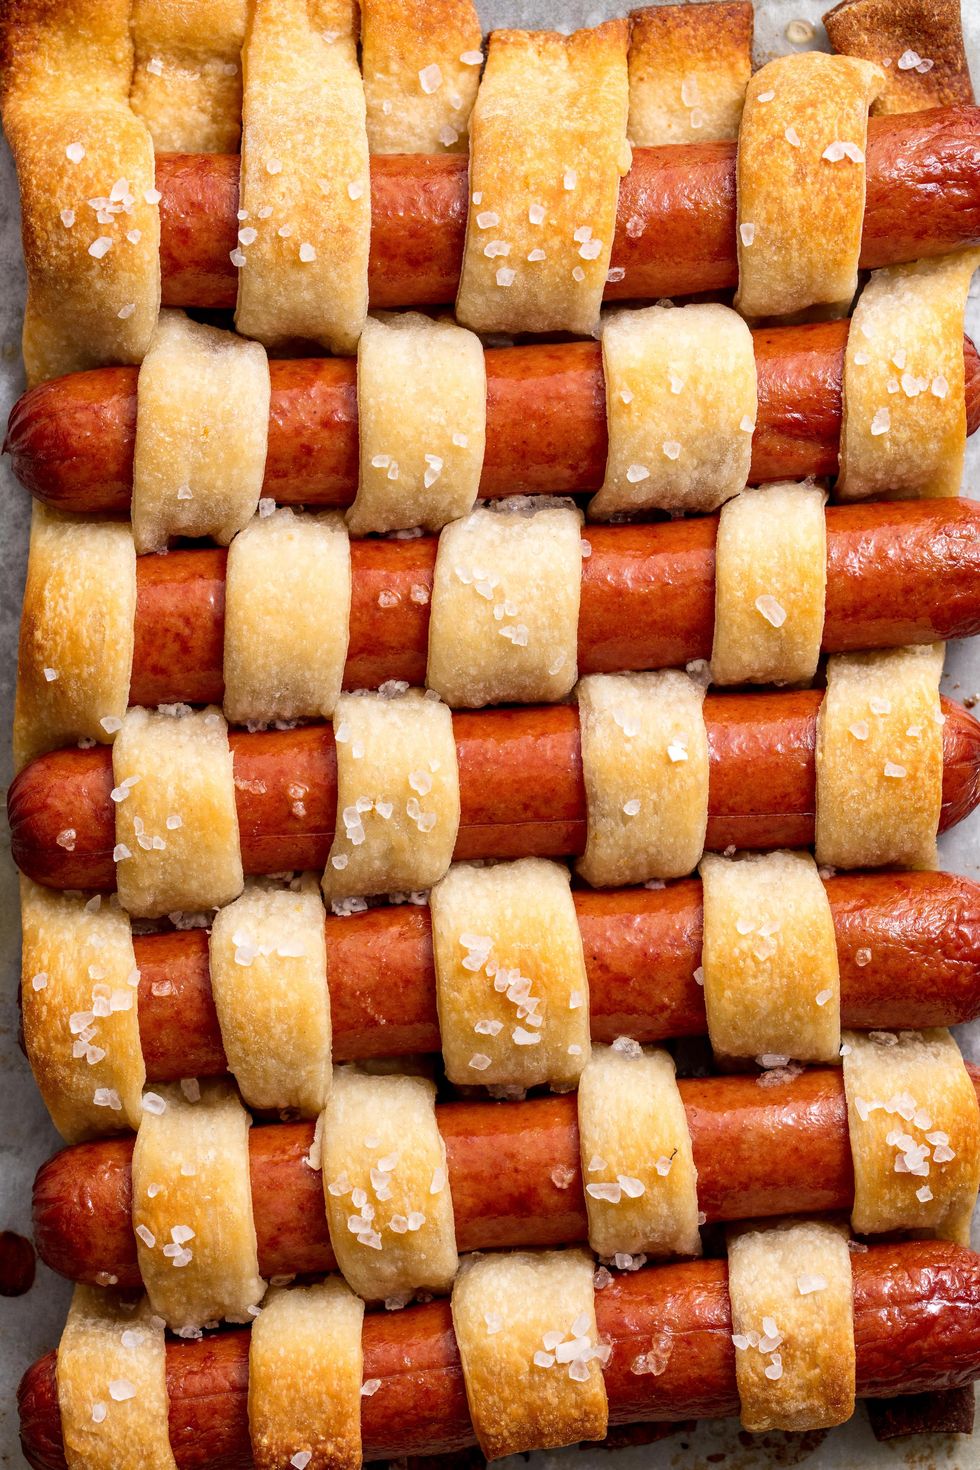 Hot Food Porn - Hot Doggone It on Food Porn Friday | From Behind the Pen